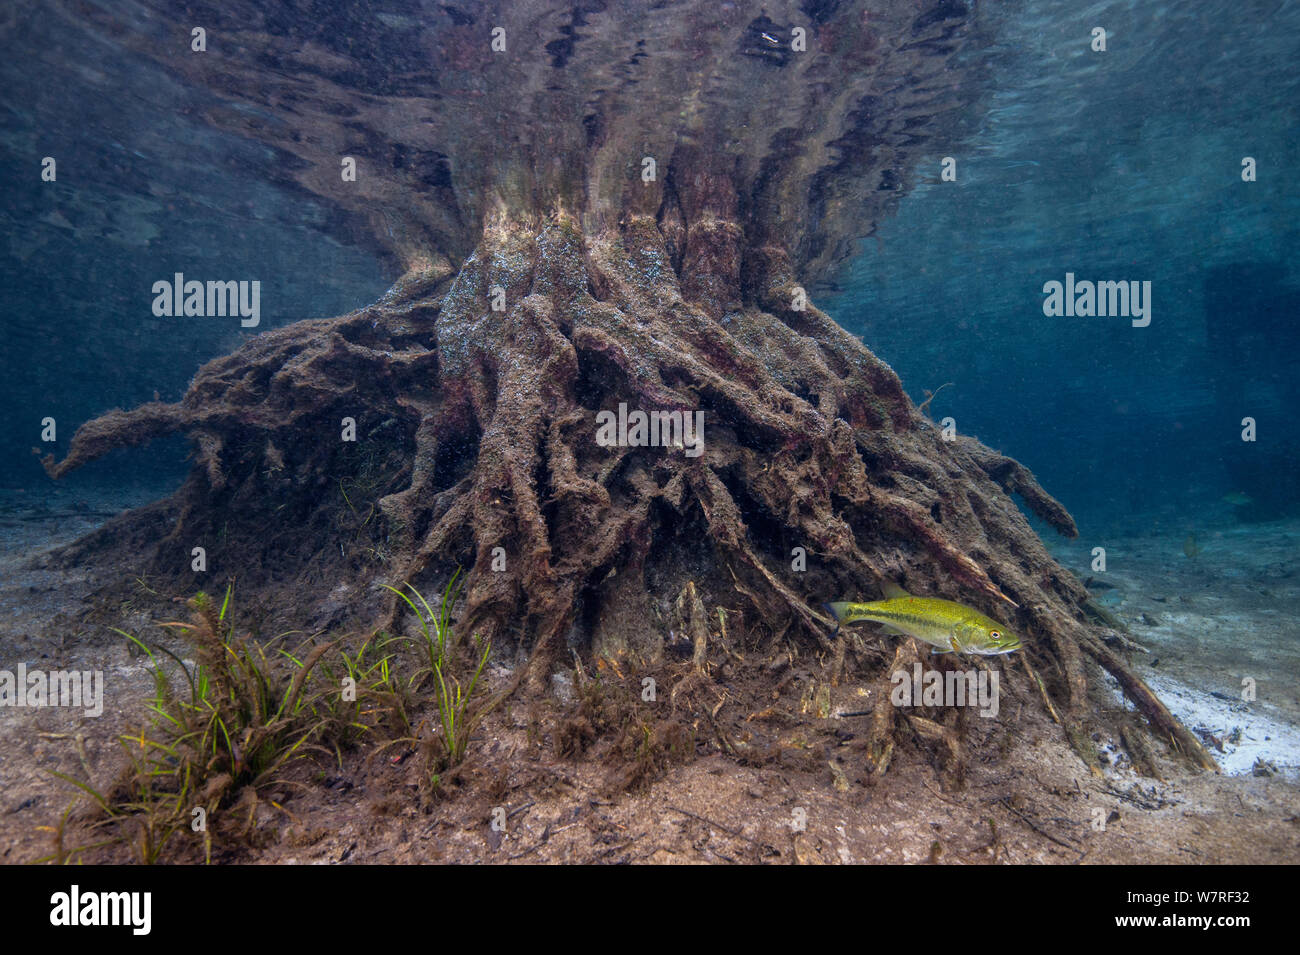 Male largemouth bass (Micropterus salmoides) guards his fry (too small to be visible) as they shelter amongst the roots of a tree submerged in a river. Rainbow River, Florida, United States of America. Stock Photo